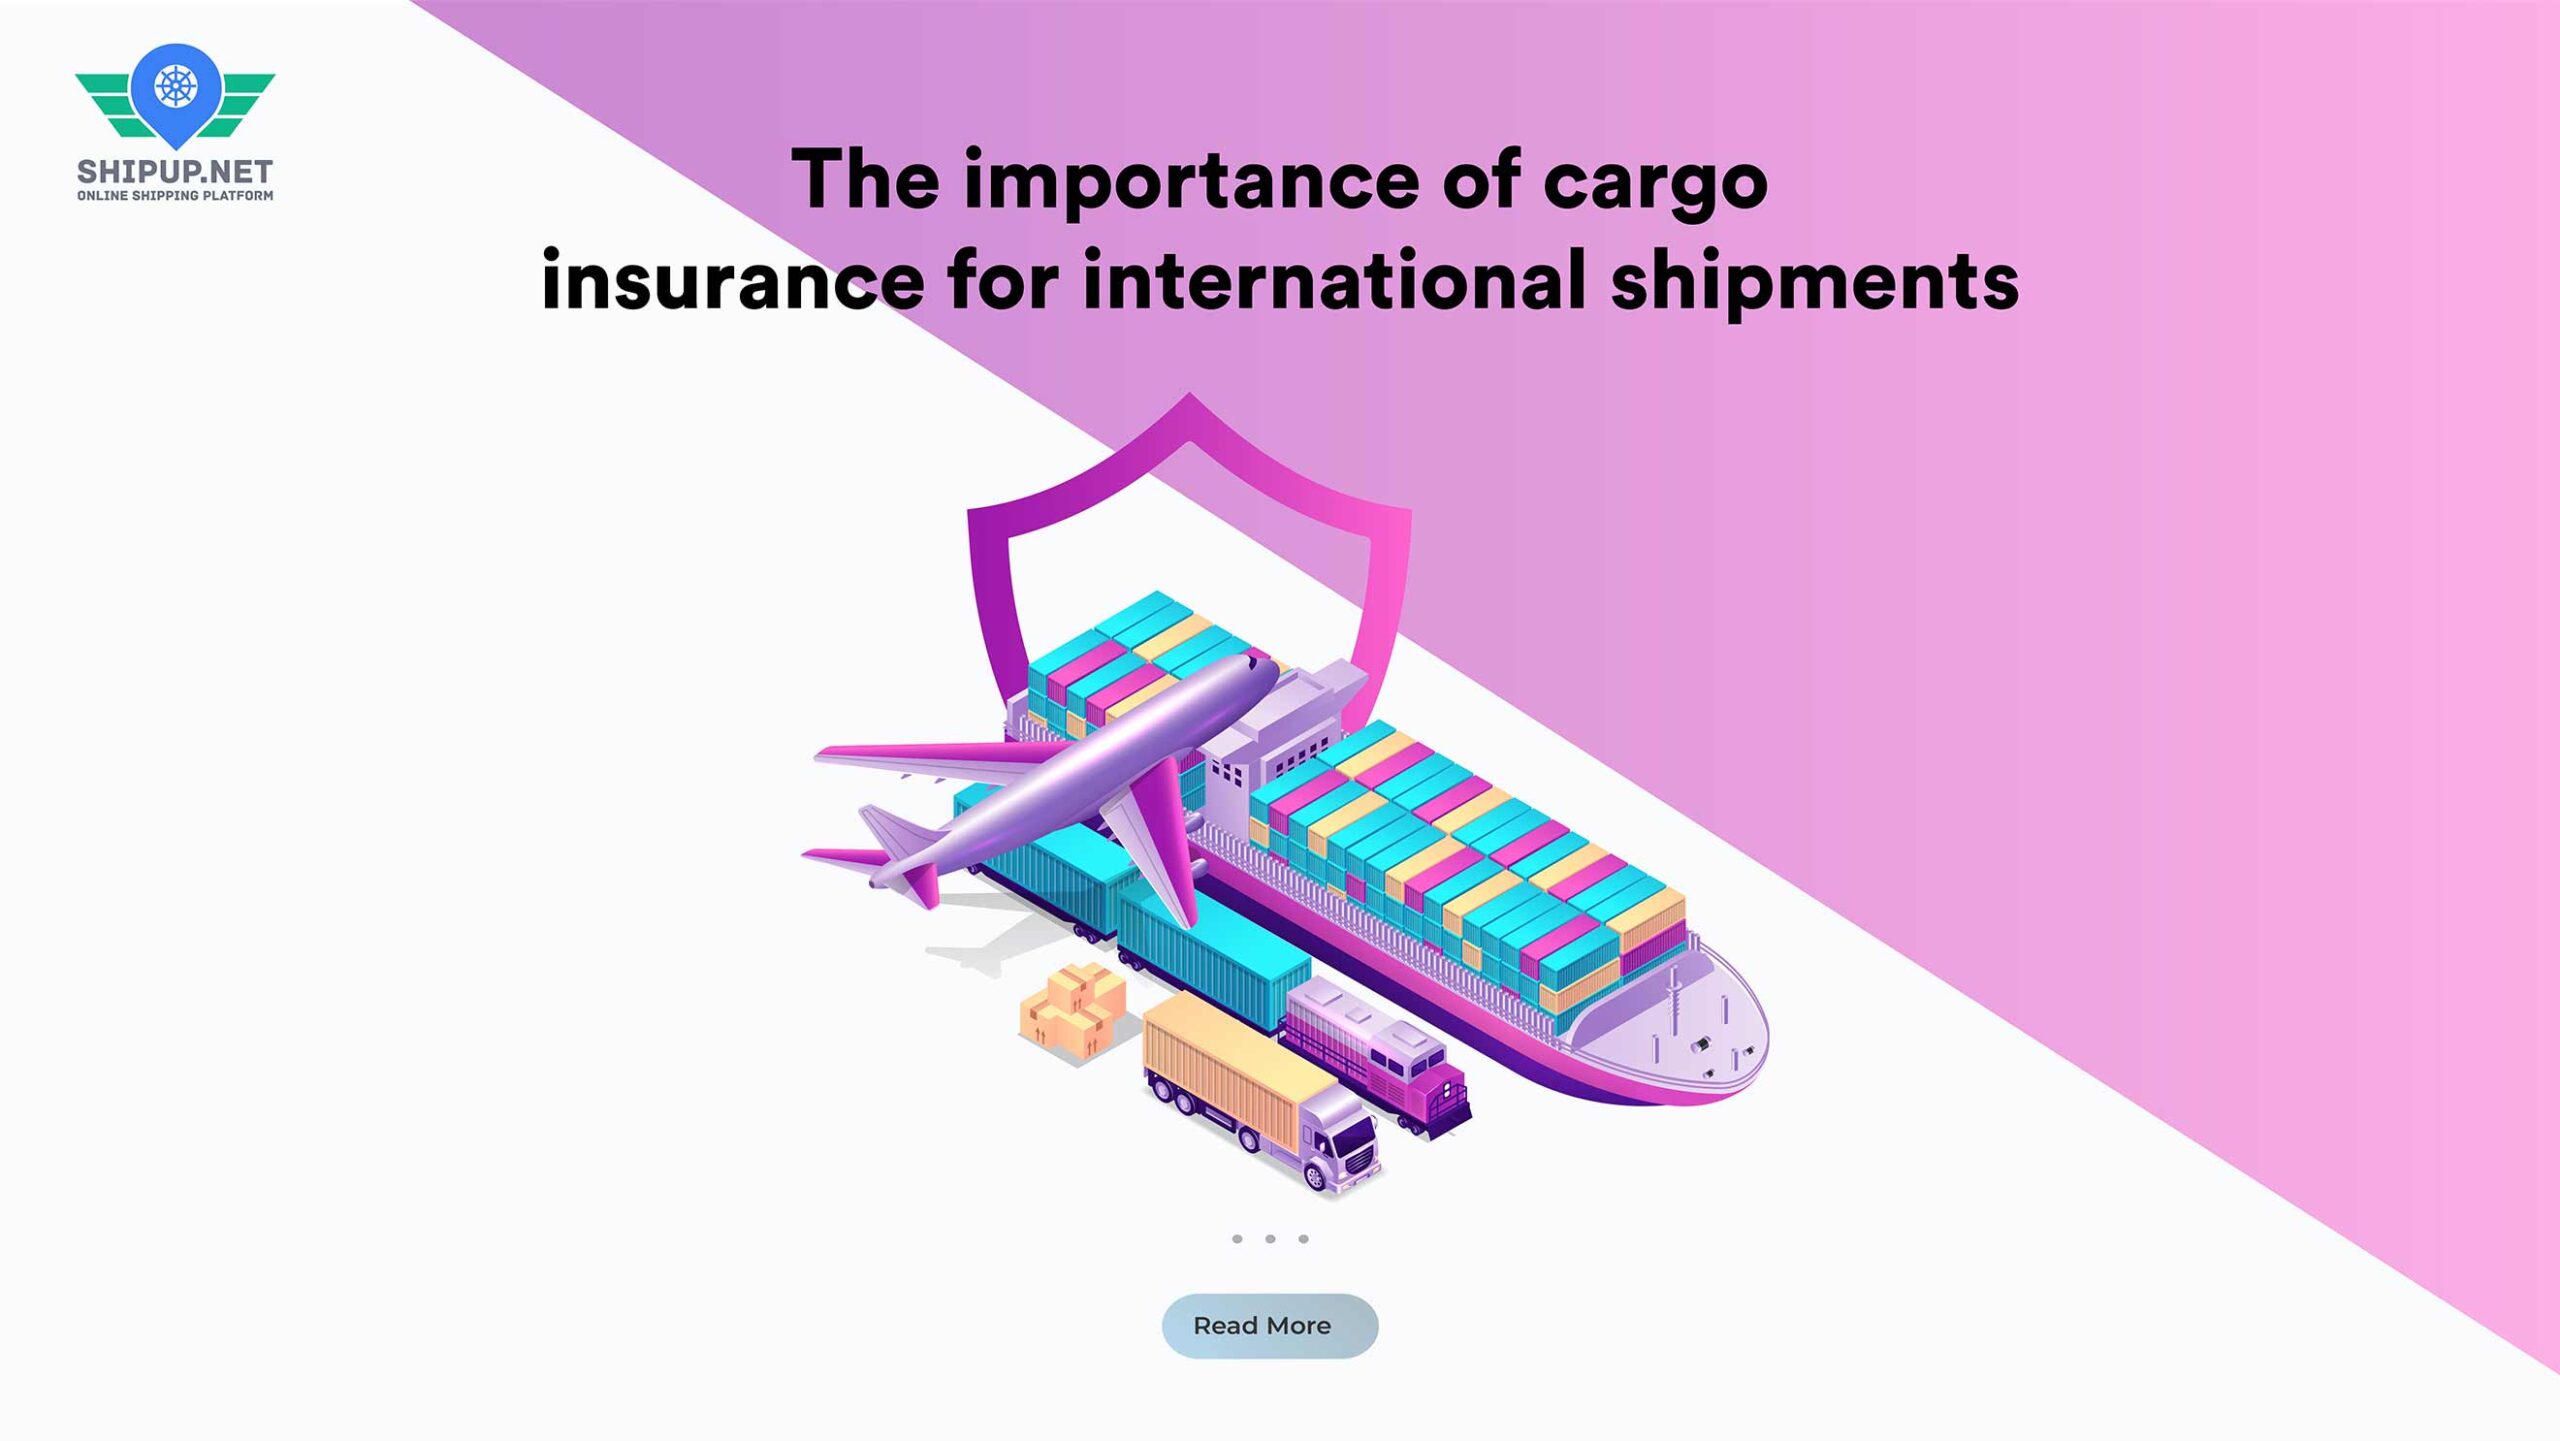 The importance of cargo insurance for international shipments